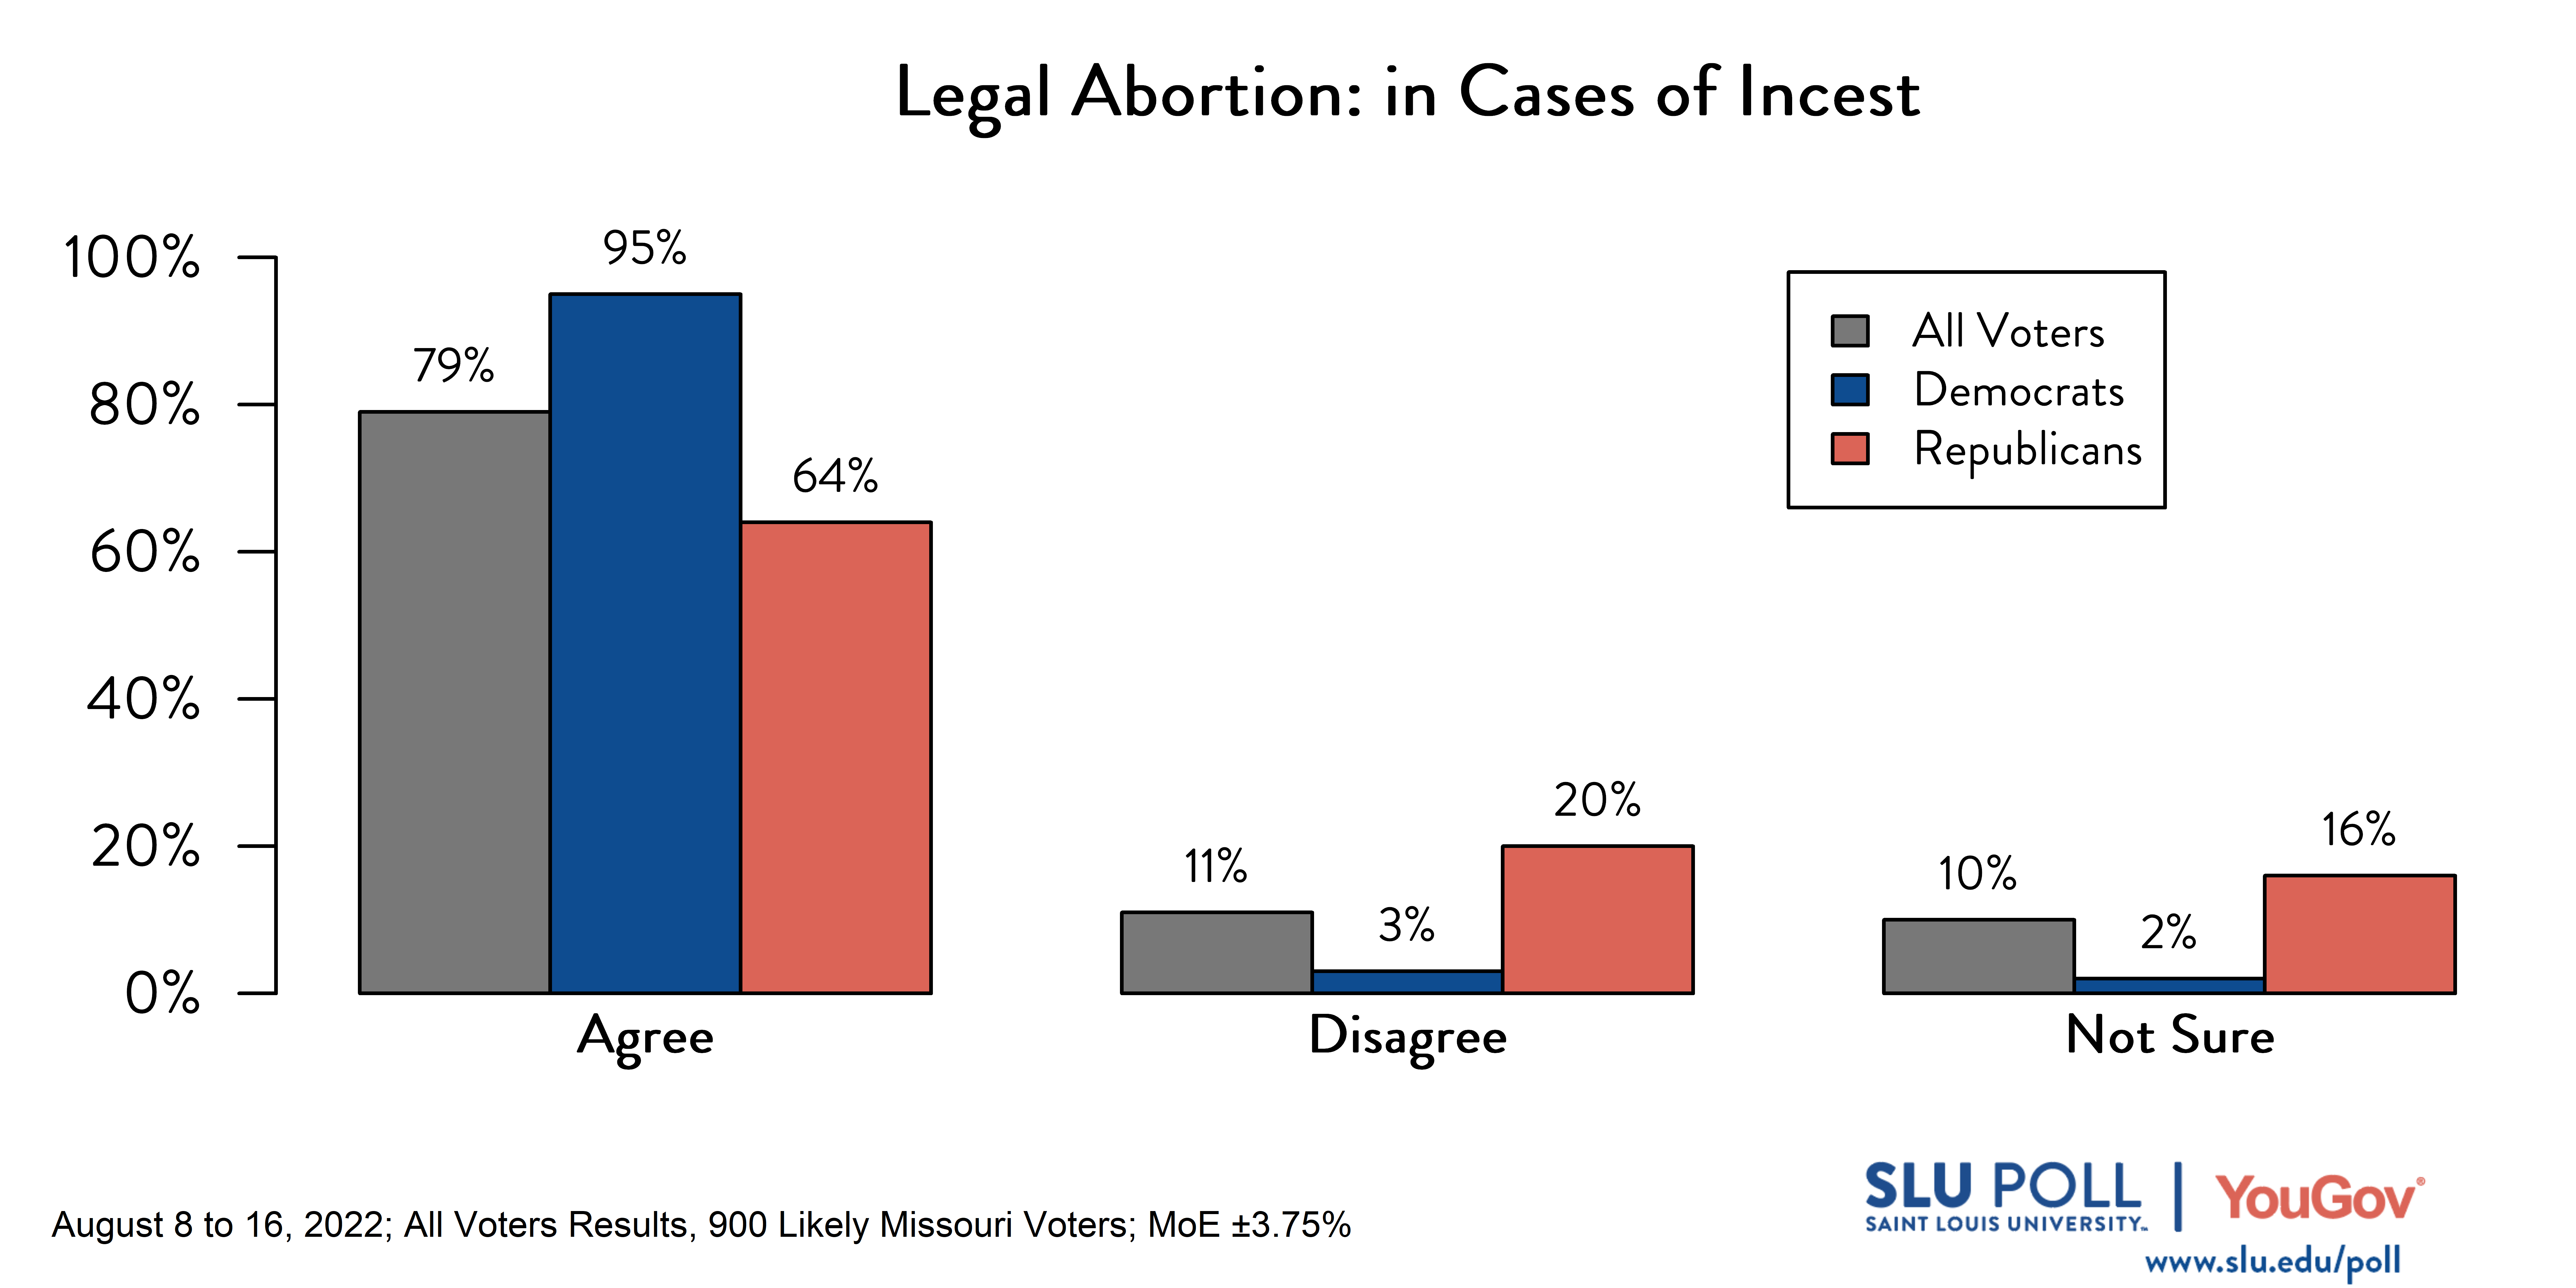 Likely voters' responses to 'Do you think it should be possible for a woman to legally obtain an abortion in the state of Missouri: in cases of incest?': 79% Agree, 11% Disagree, and 10% Not Sure. Democratic voters' responses: ' 95% Agree, 3% Disagree, and 2% Not Sure. Republican voters' responses: 64% Agree, 20% Disagree, and 16% Not Sure. 